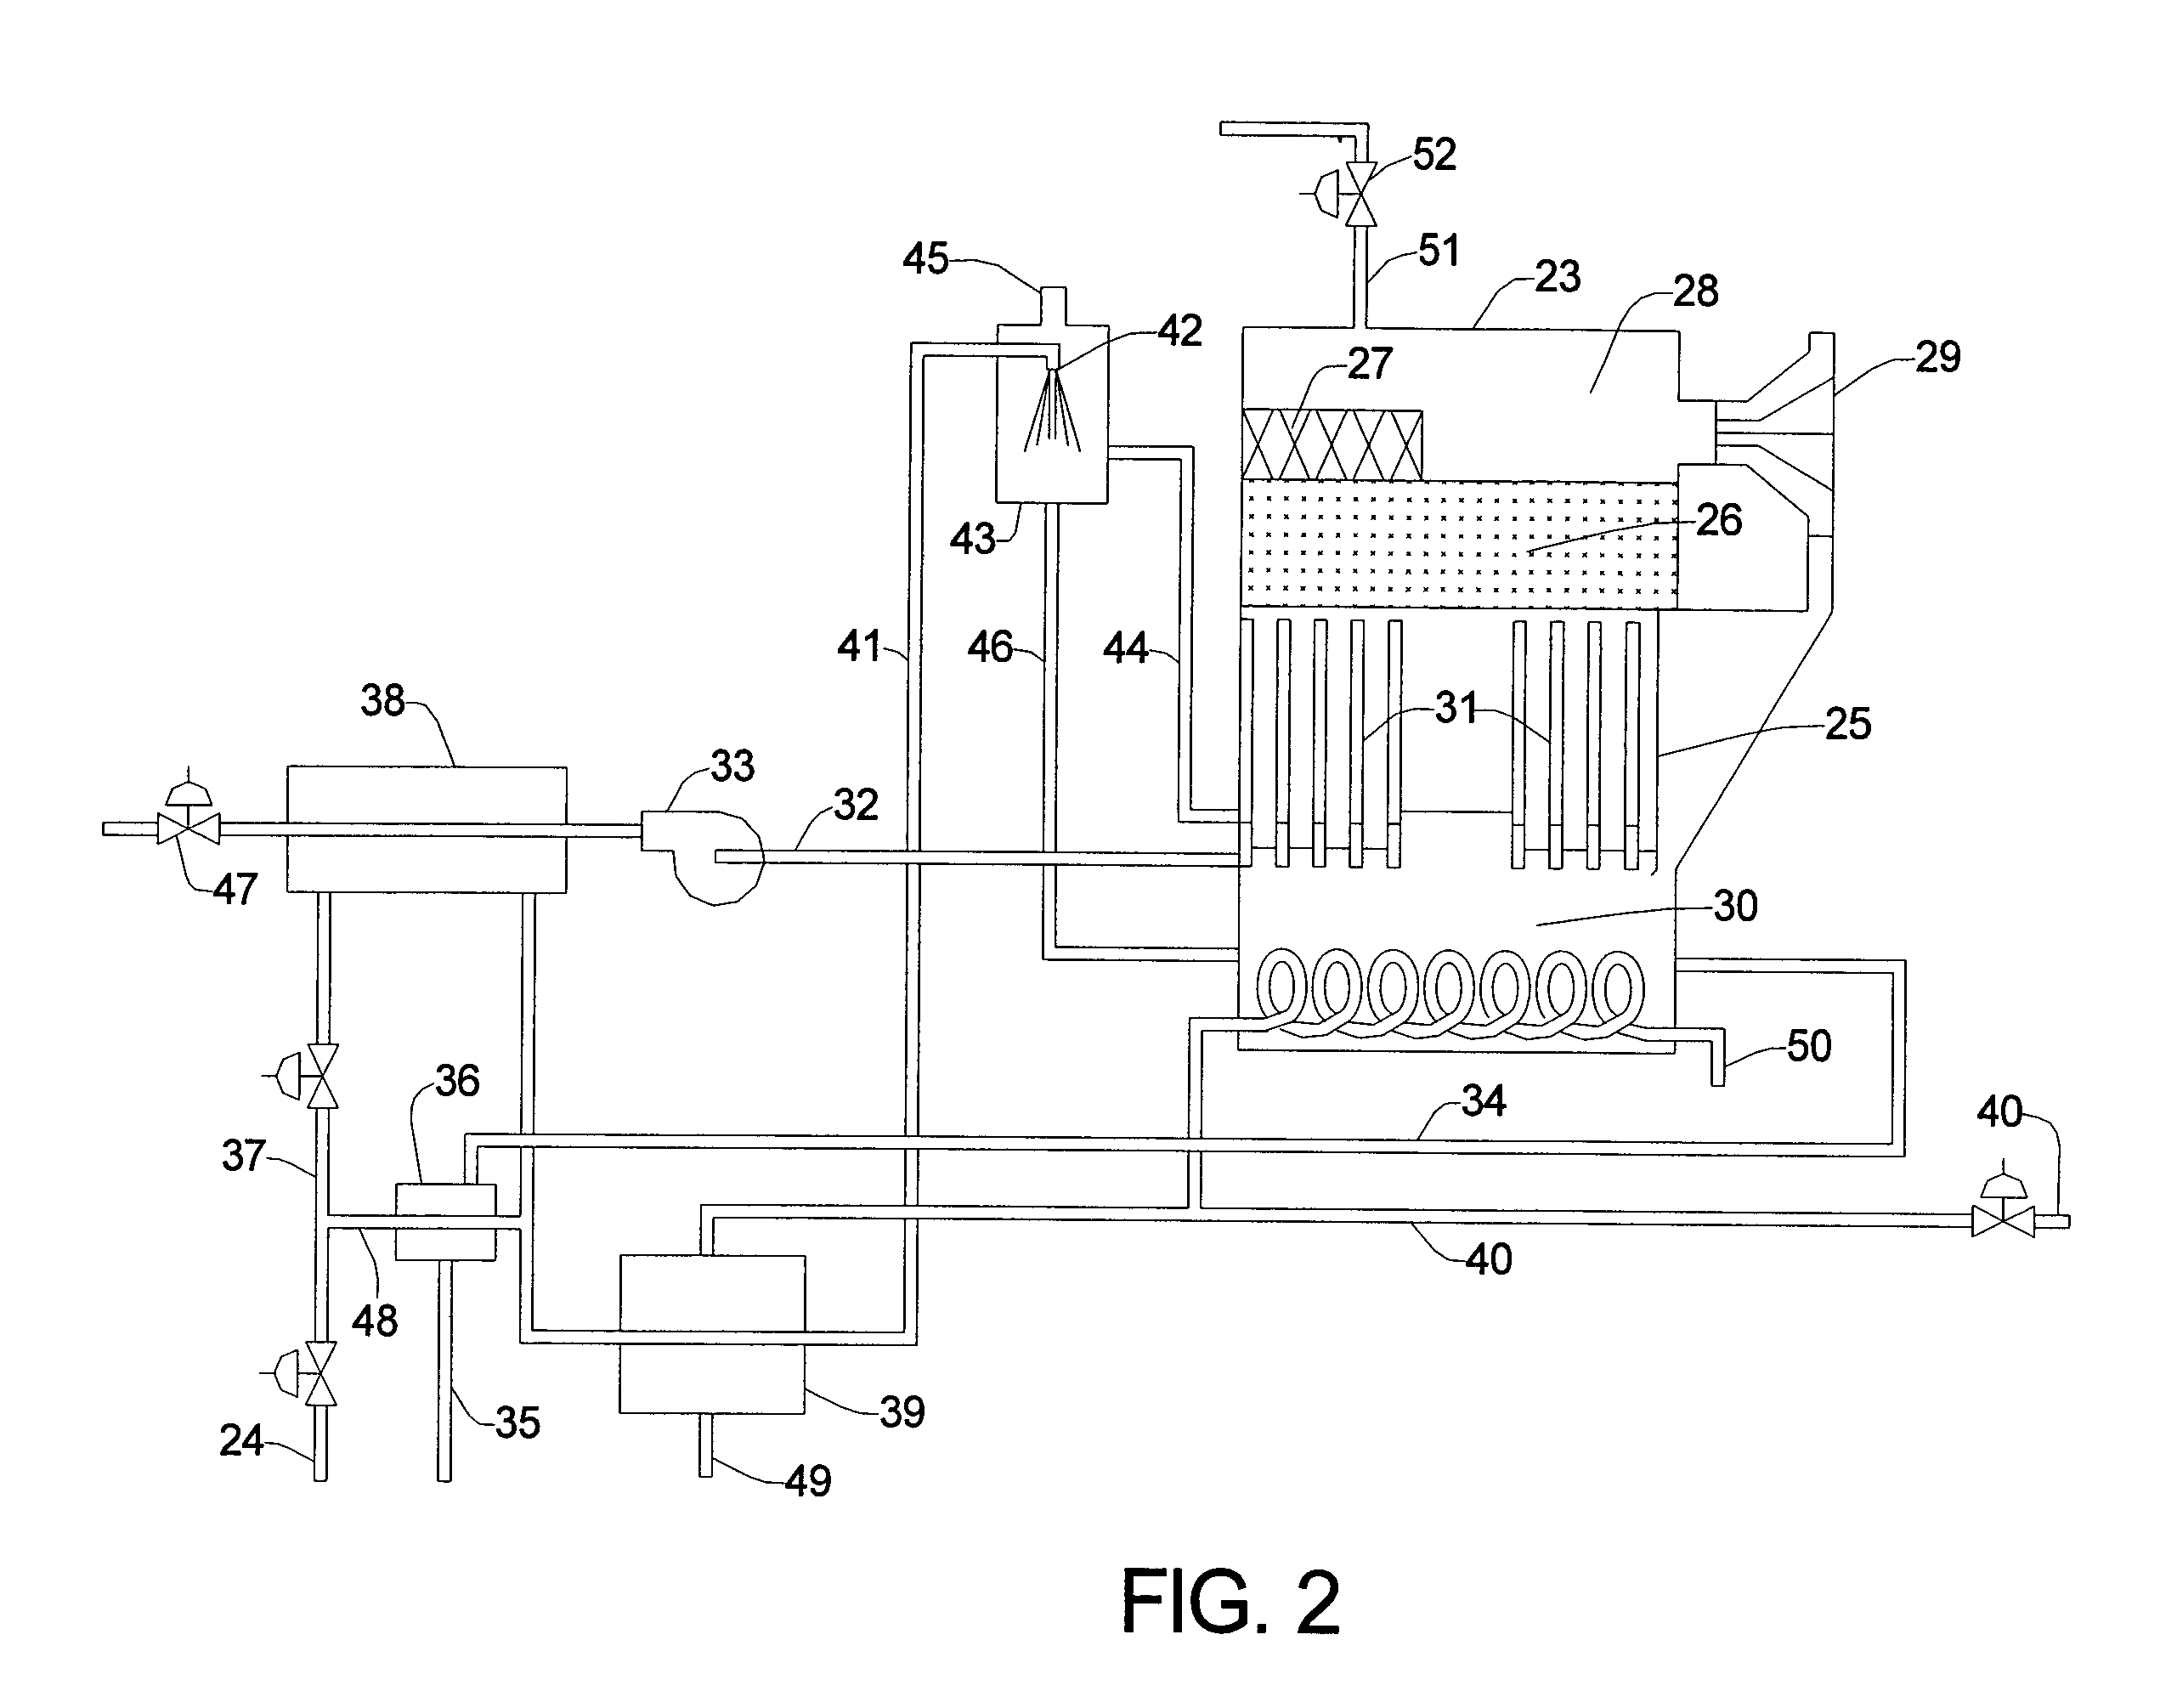 Method and system for the manufacture of pharmaceutical water